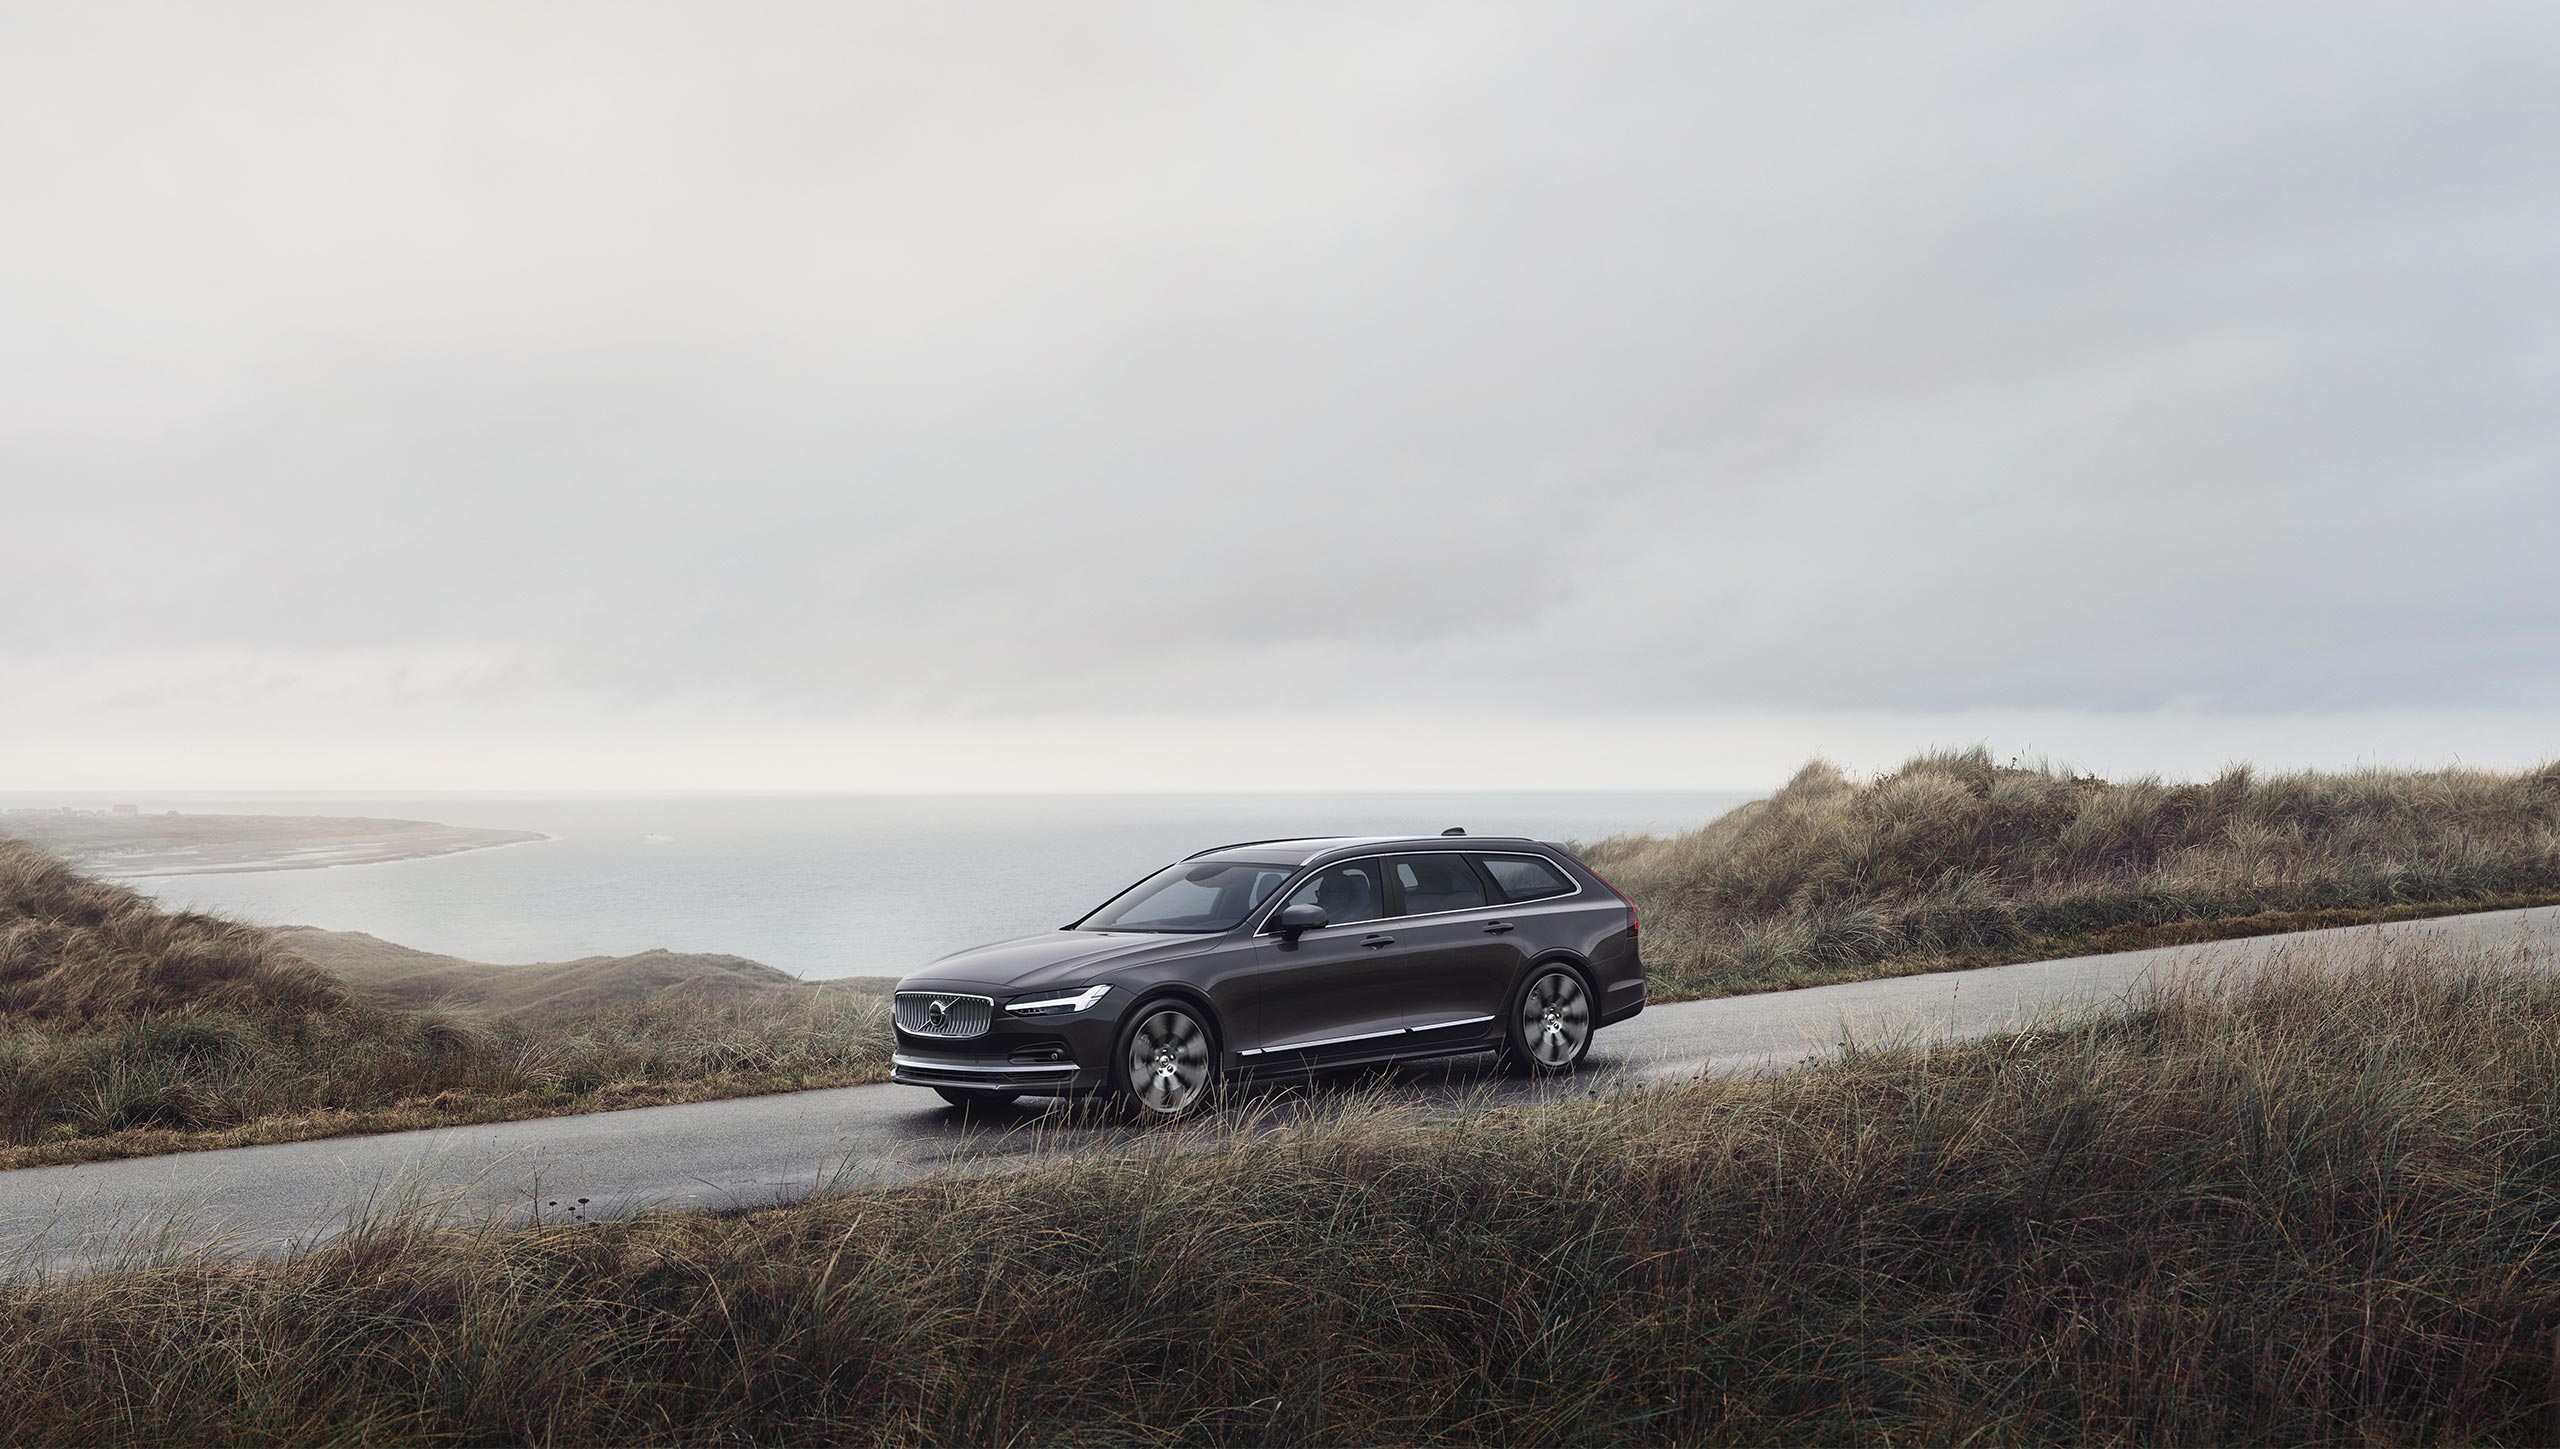 Platinum grey Volvo V90 driving on mountains with seaview.